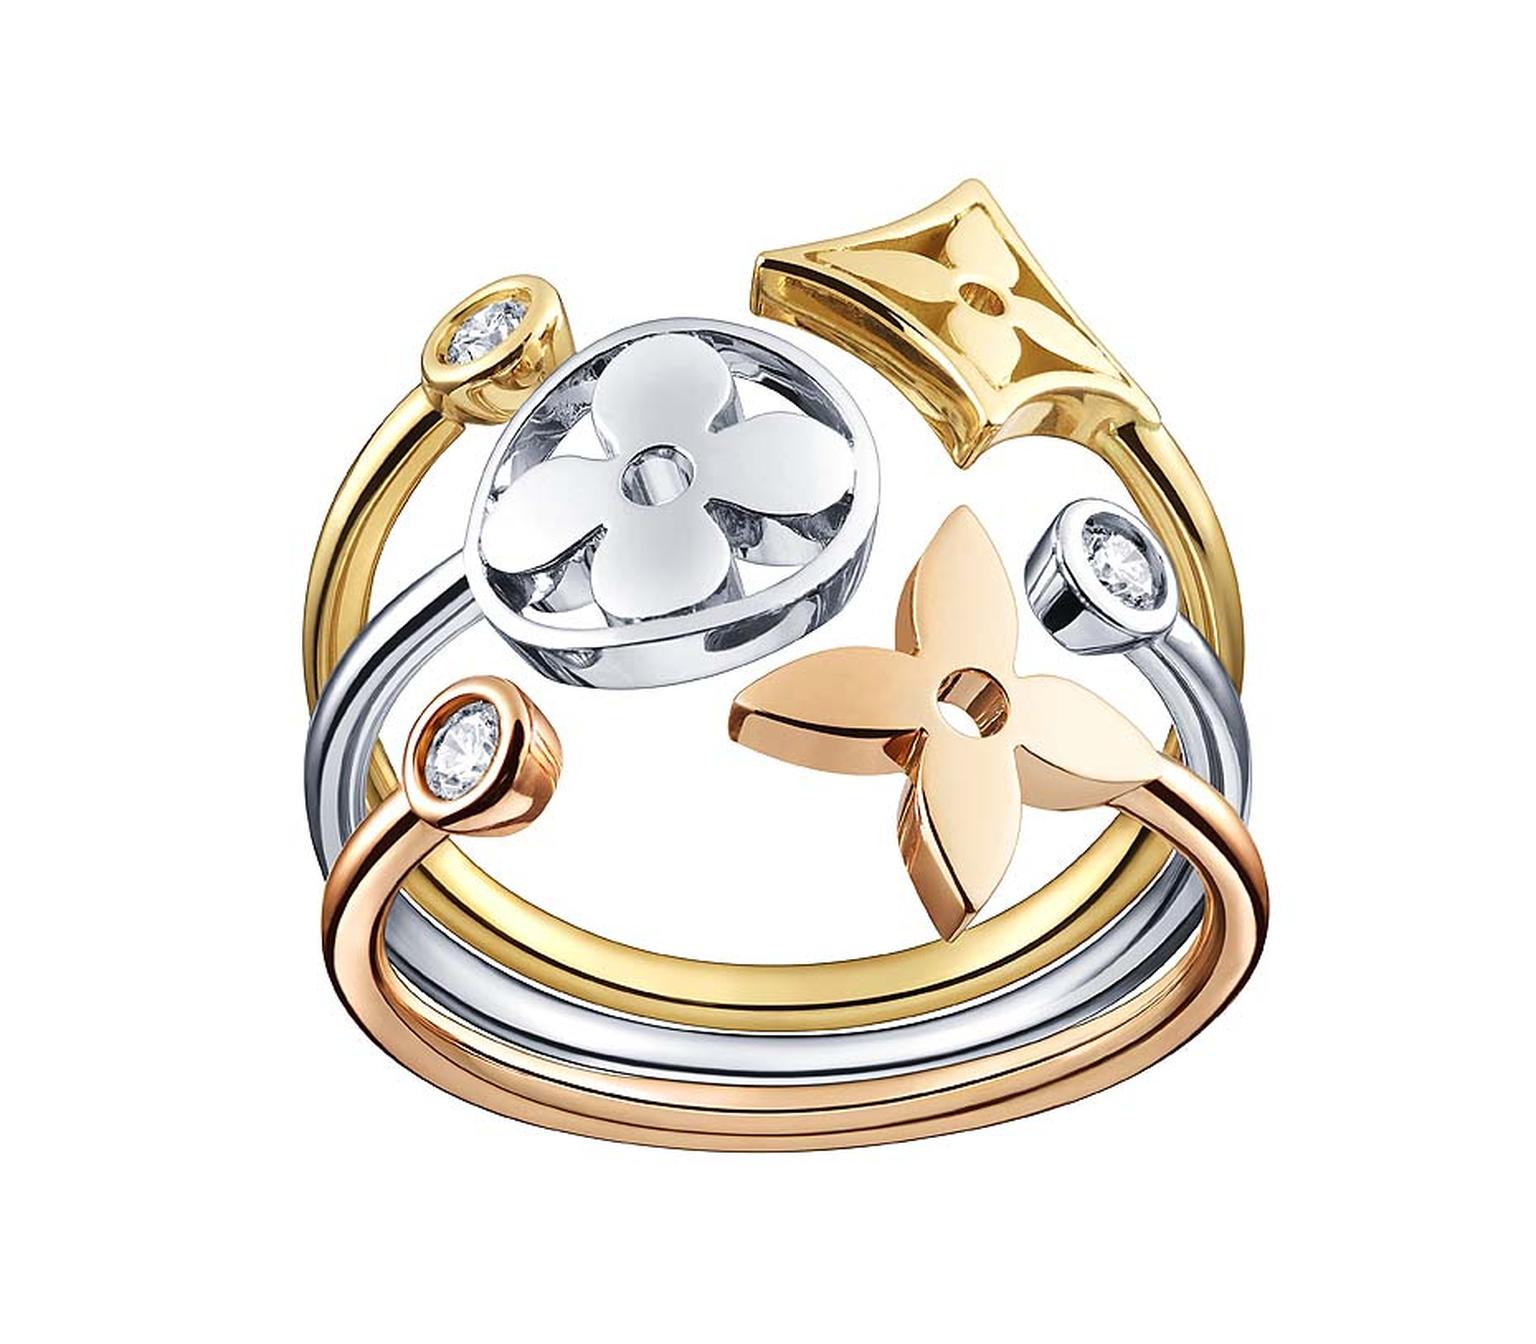 Louis Vuitton jewellery: new Monogram Idylle collection is the